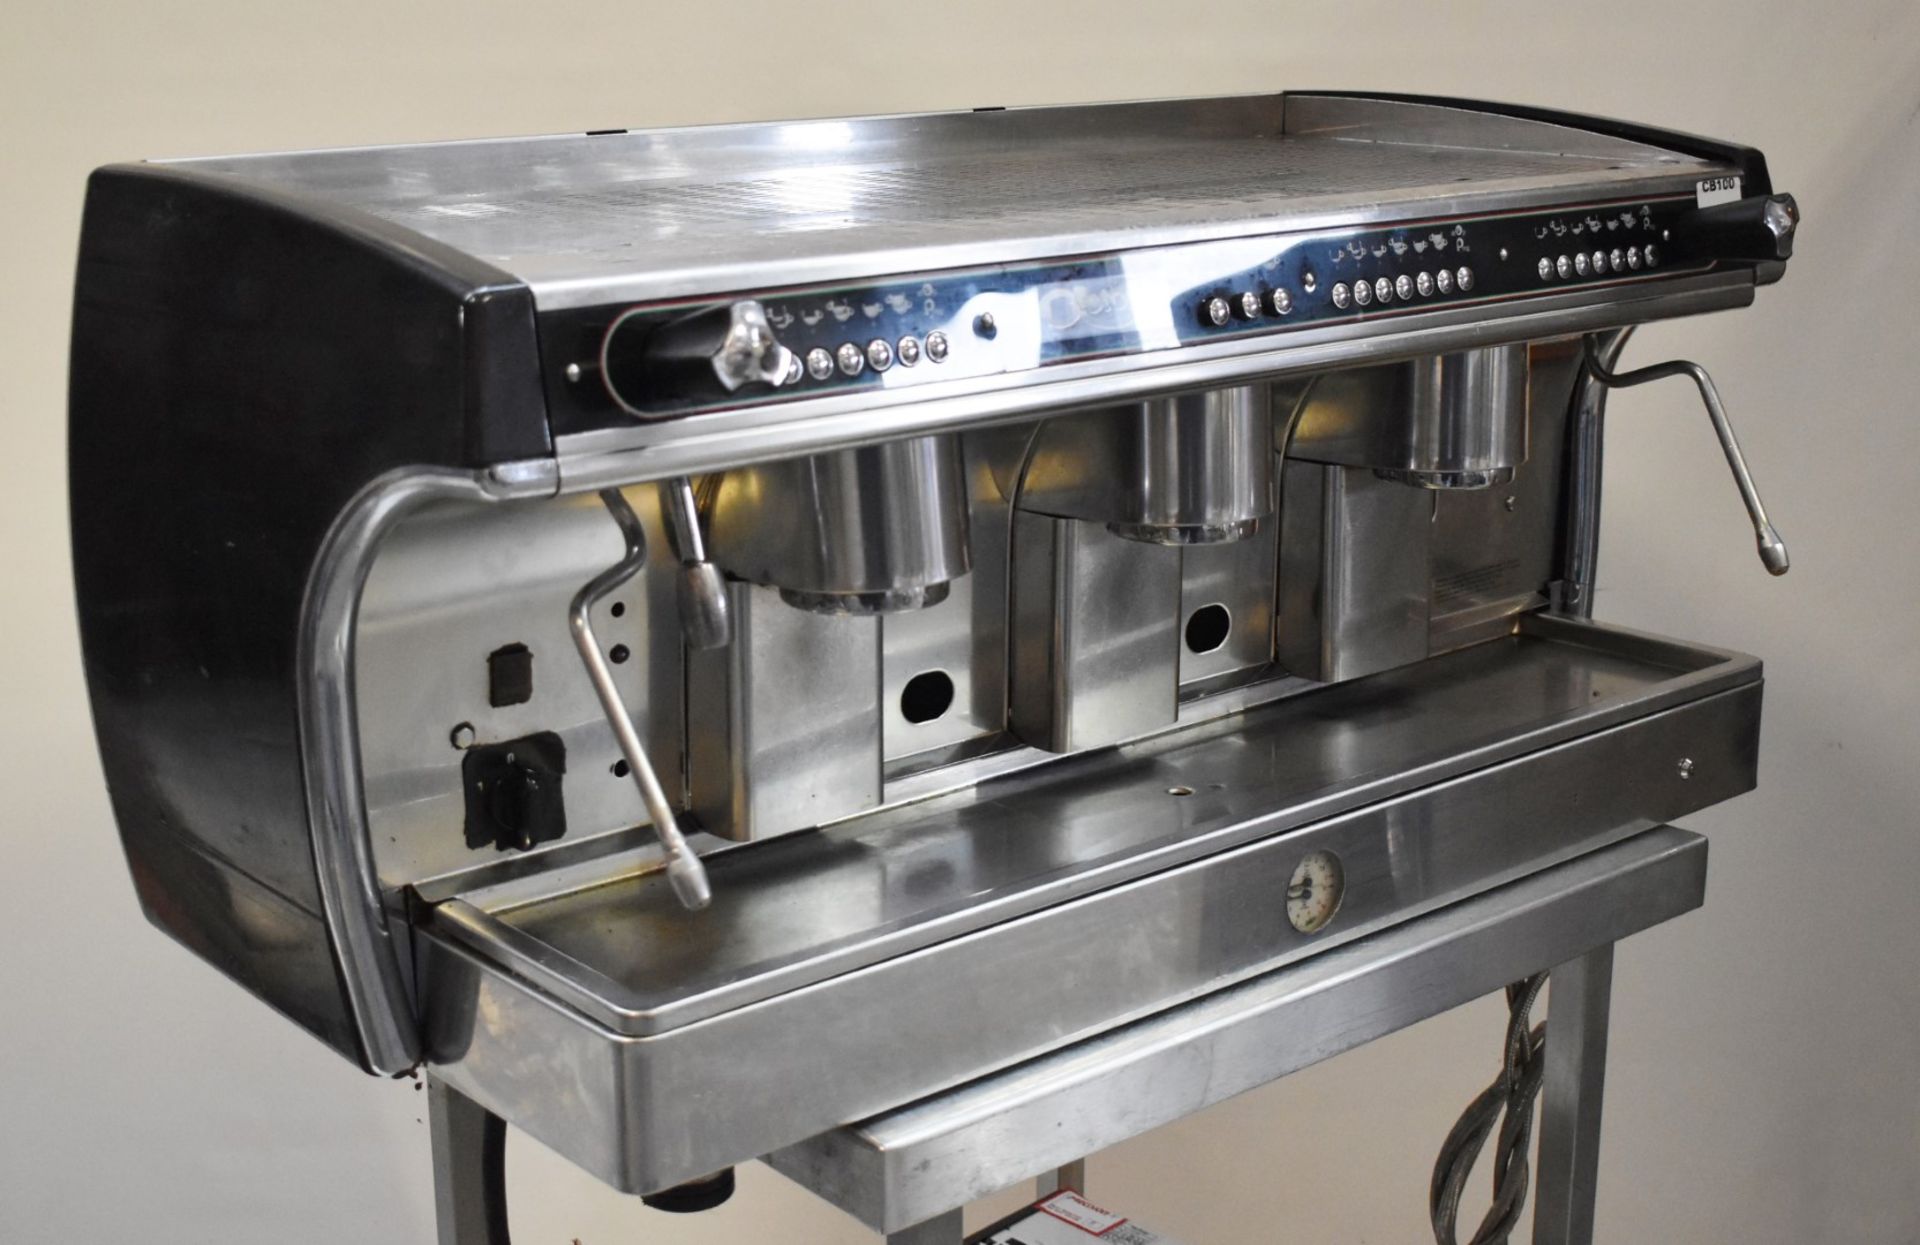 1 x Magrini 3 Group Coffee Espresso Machine With Stainless Steel and Black Finish - H47 x W106 x D57